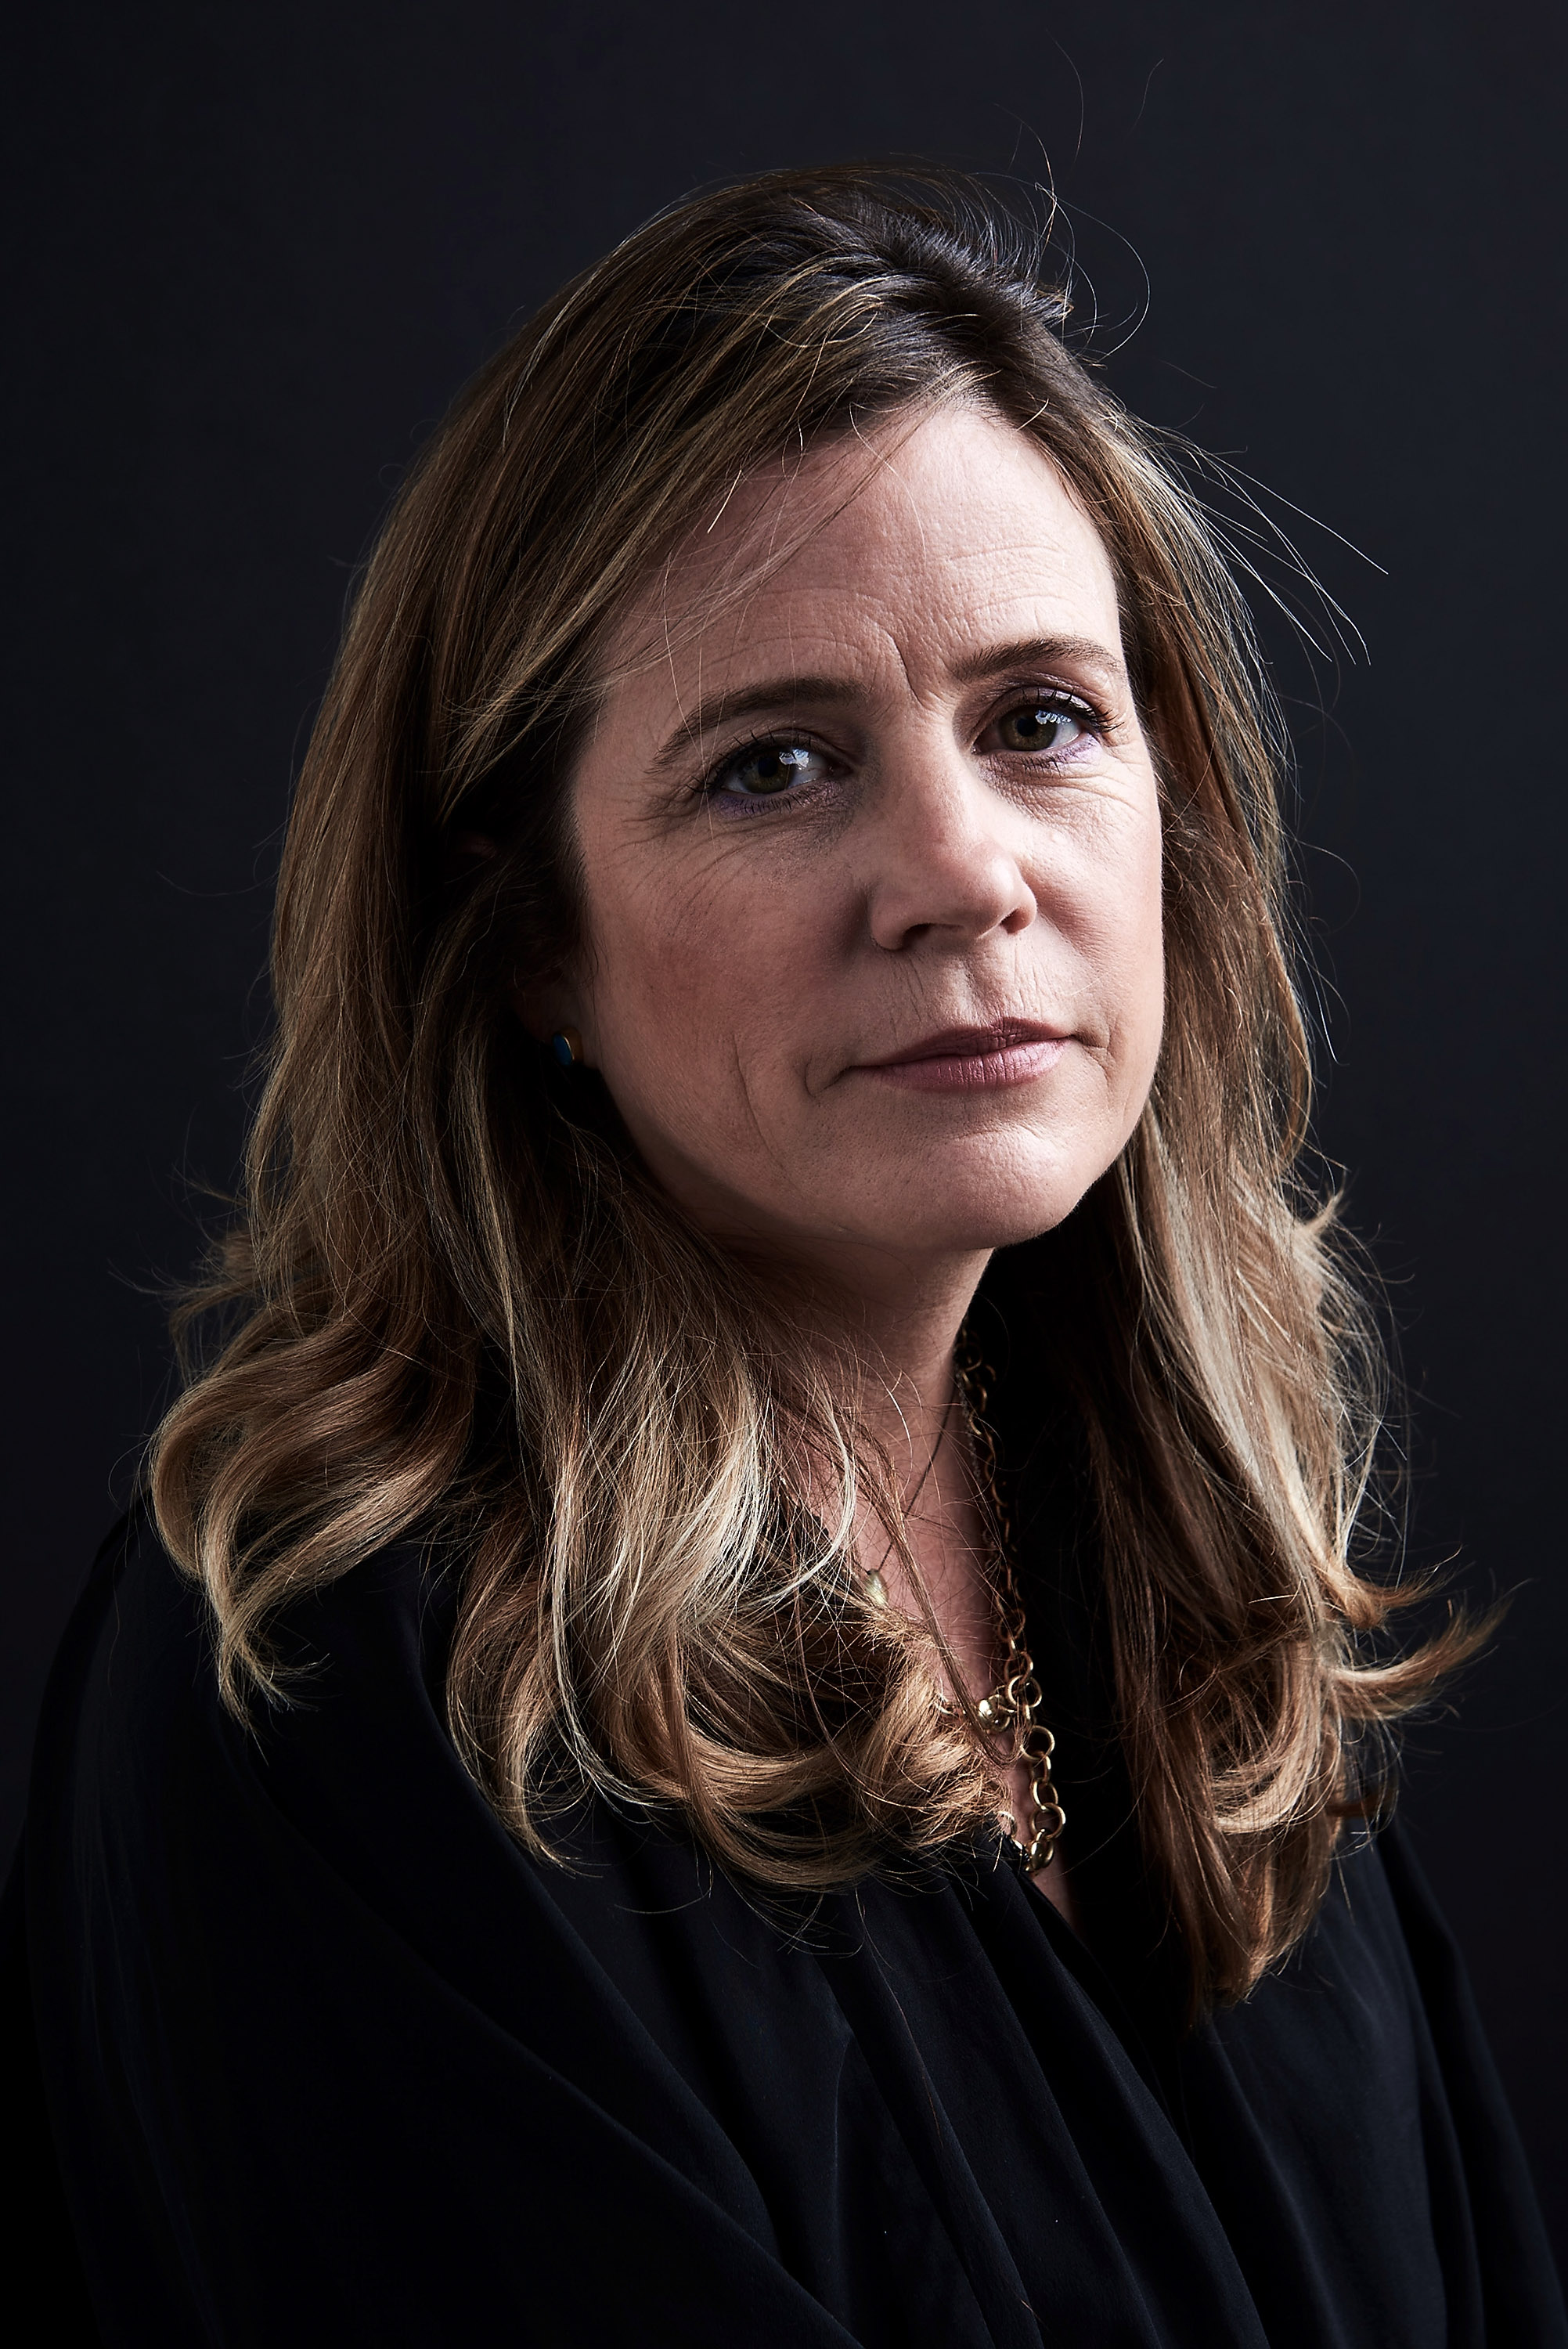 Director Tracy Droz Tragos from "Abortion: Stories Women Tell" poses at the Tribeca Film Festival Getty Images Studio in New York City on April 18, 2016.